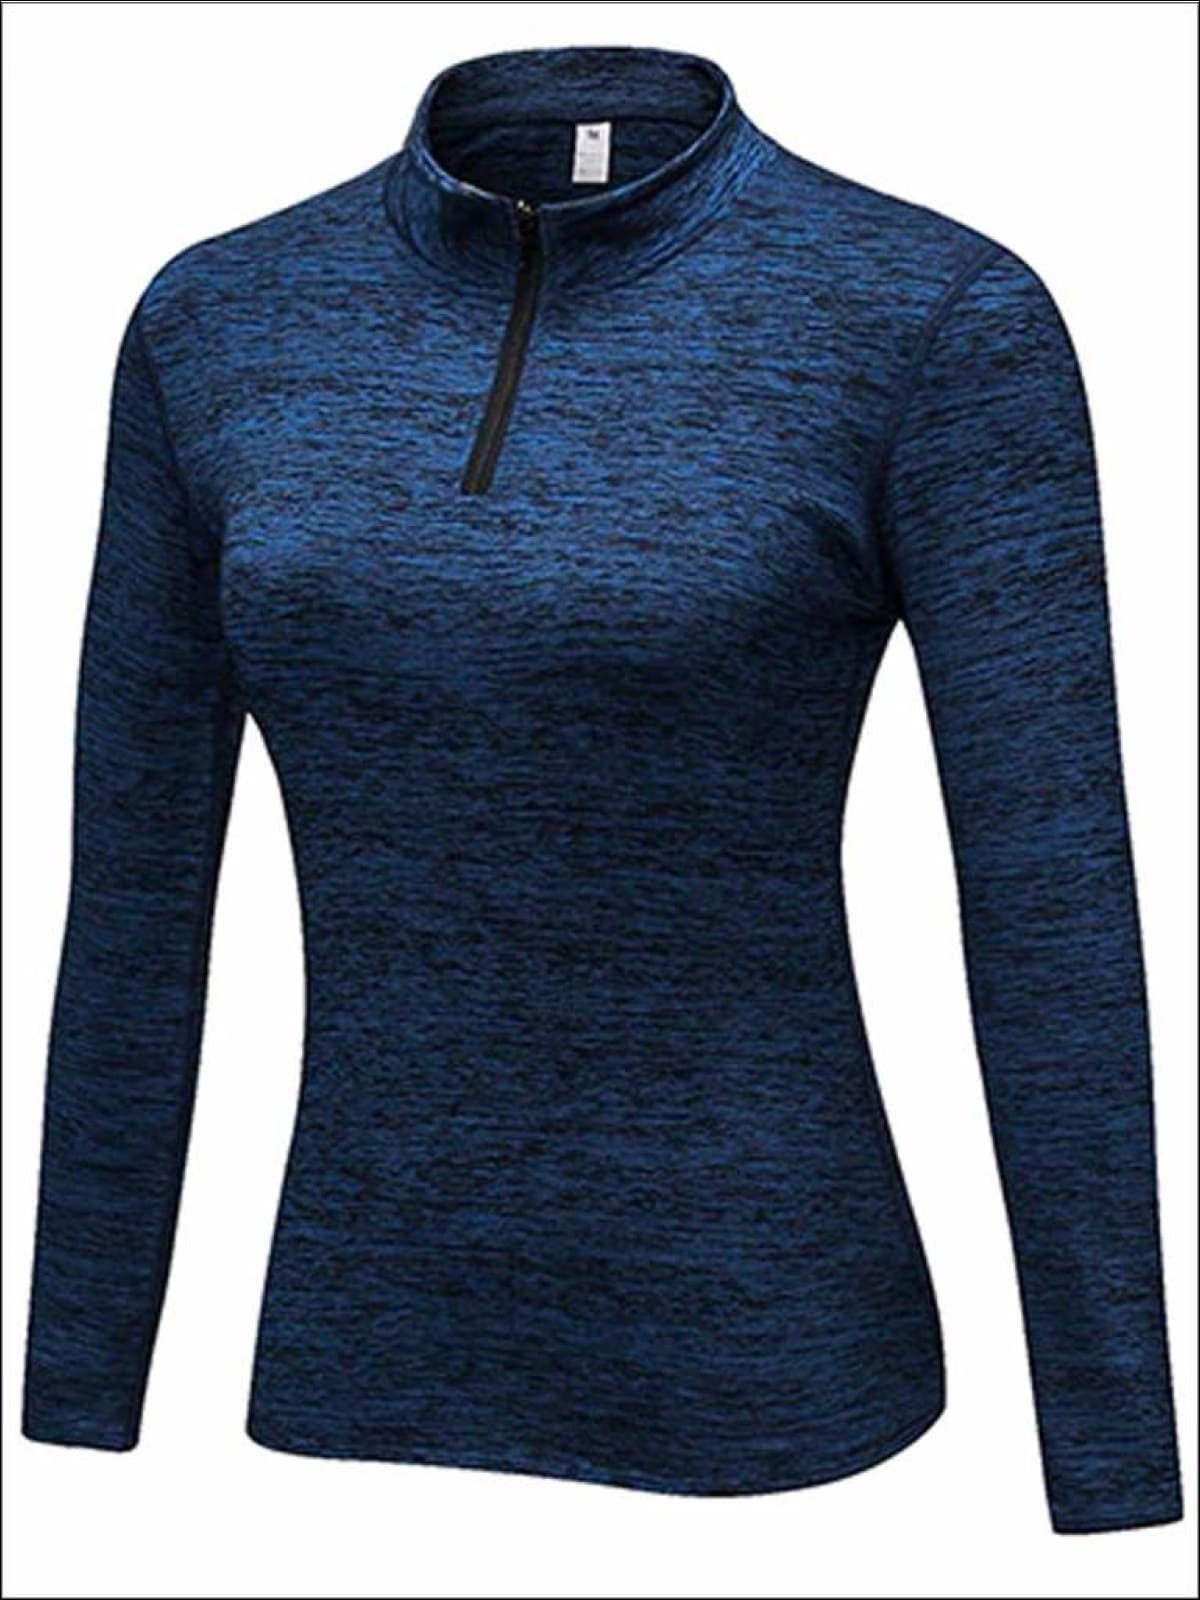 Womens Marled Zip Up Jacket - Blue / S - Womens Activewear